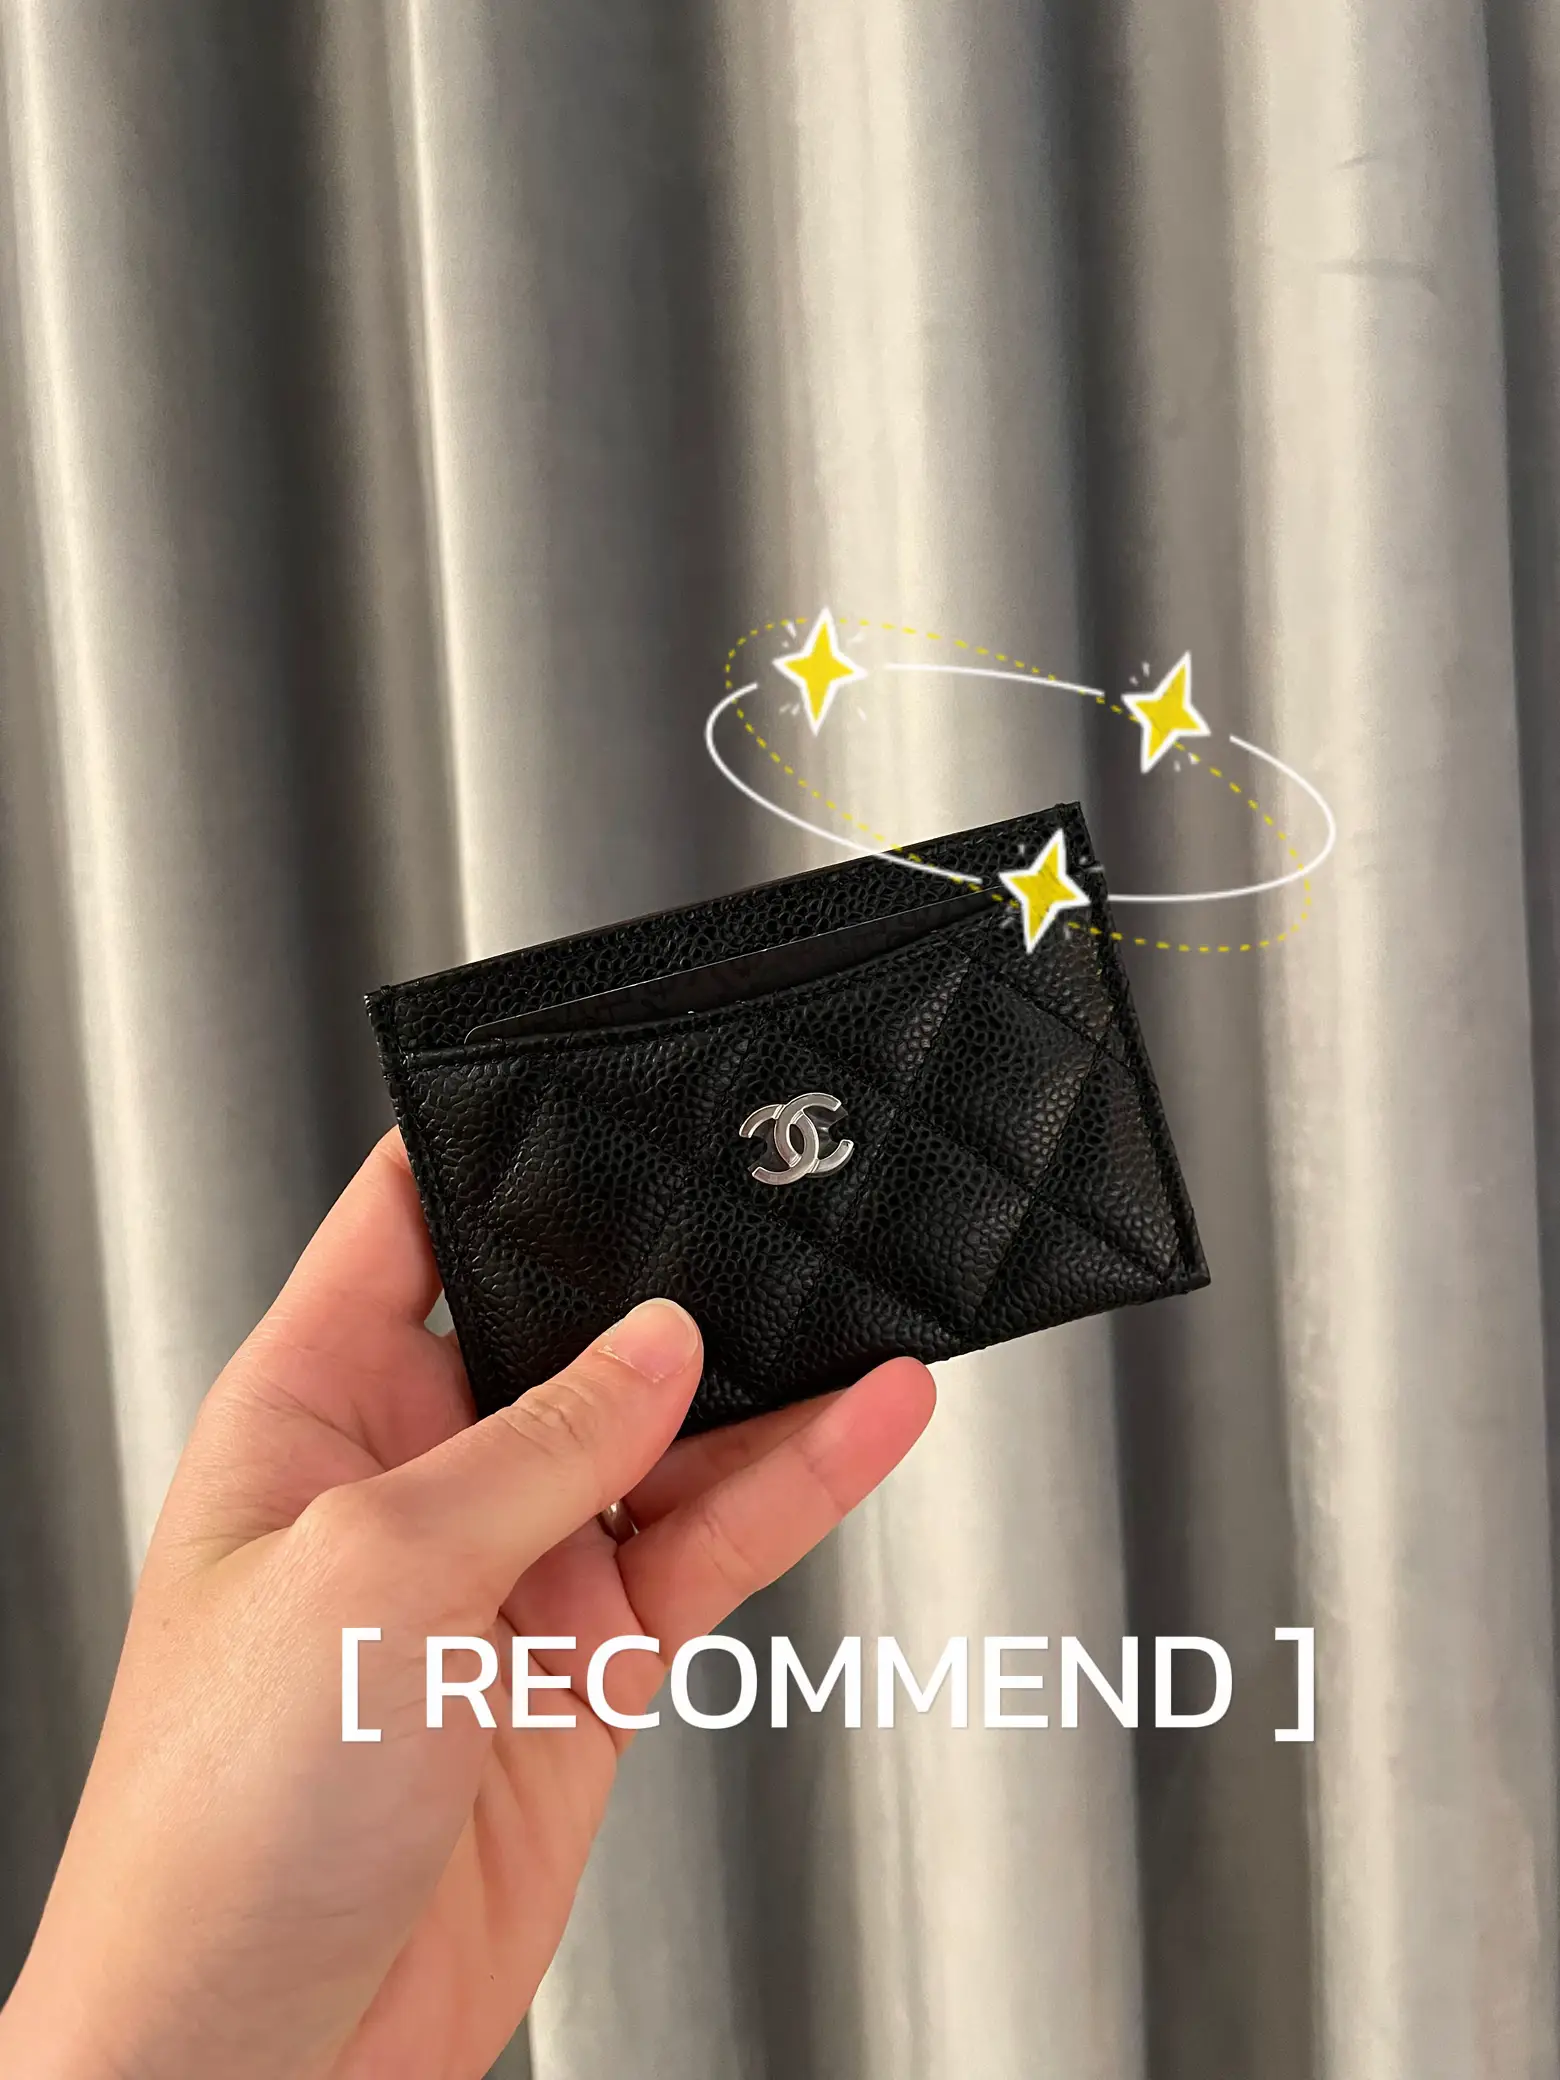 Chanel card holder 🖤, Gallery posted by Katainoii 🐰